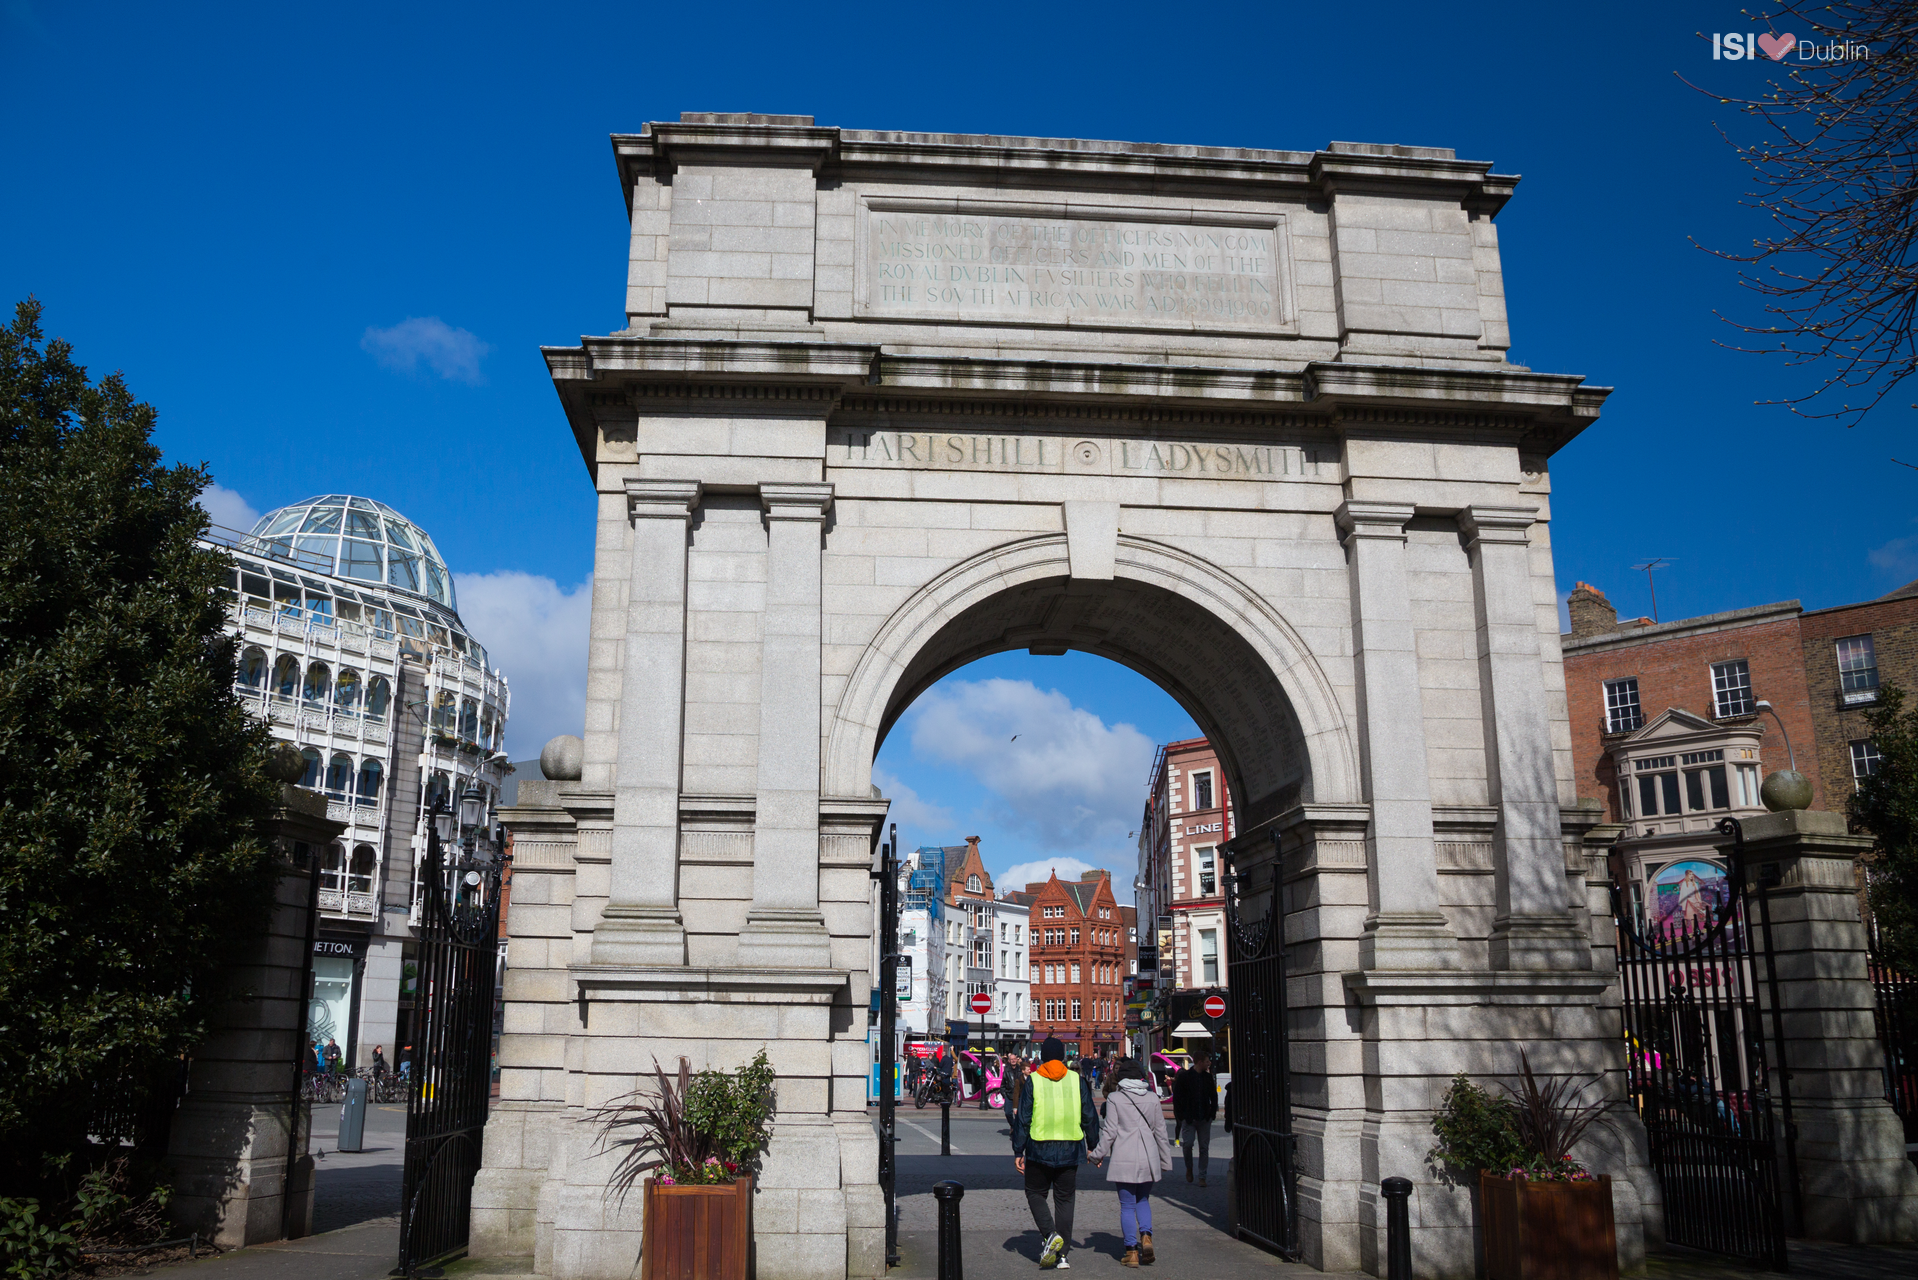 Fusilier's Arch in St. Stephen's Green